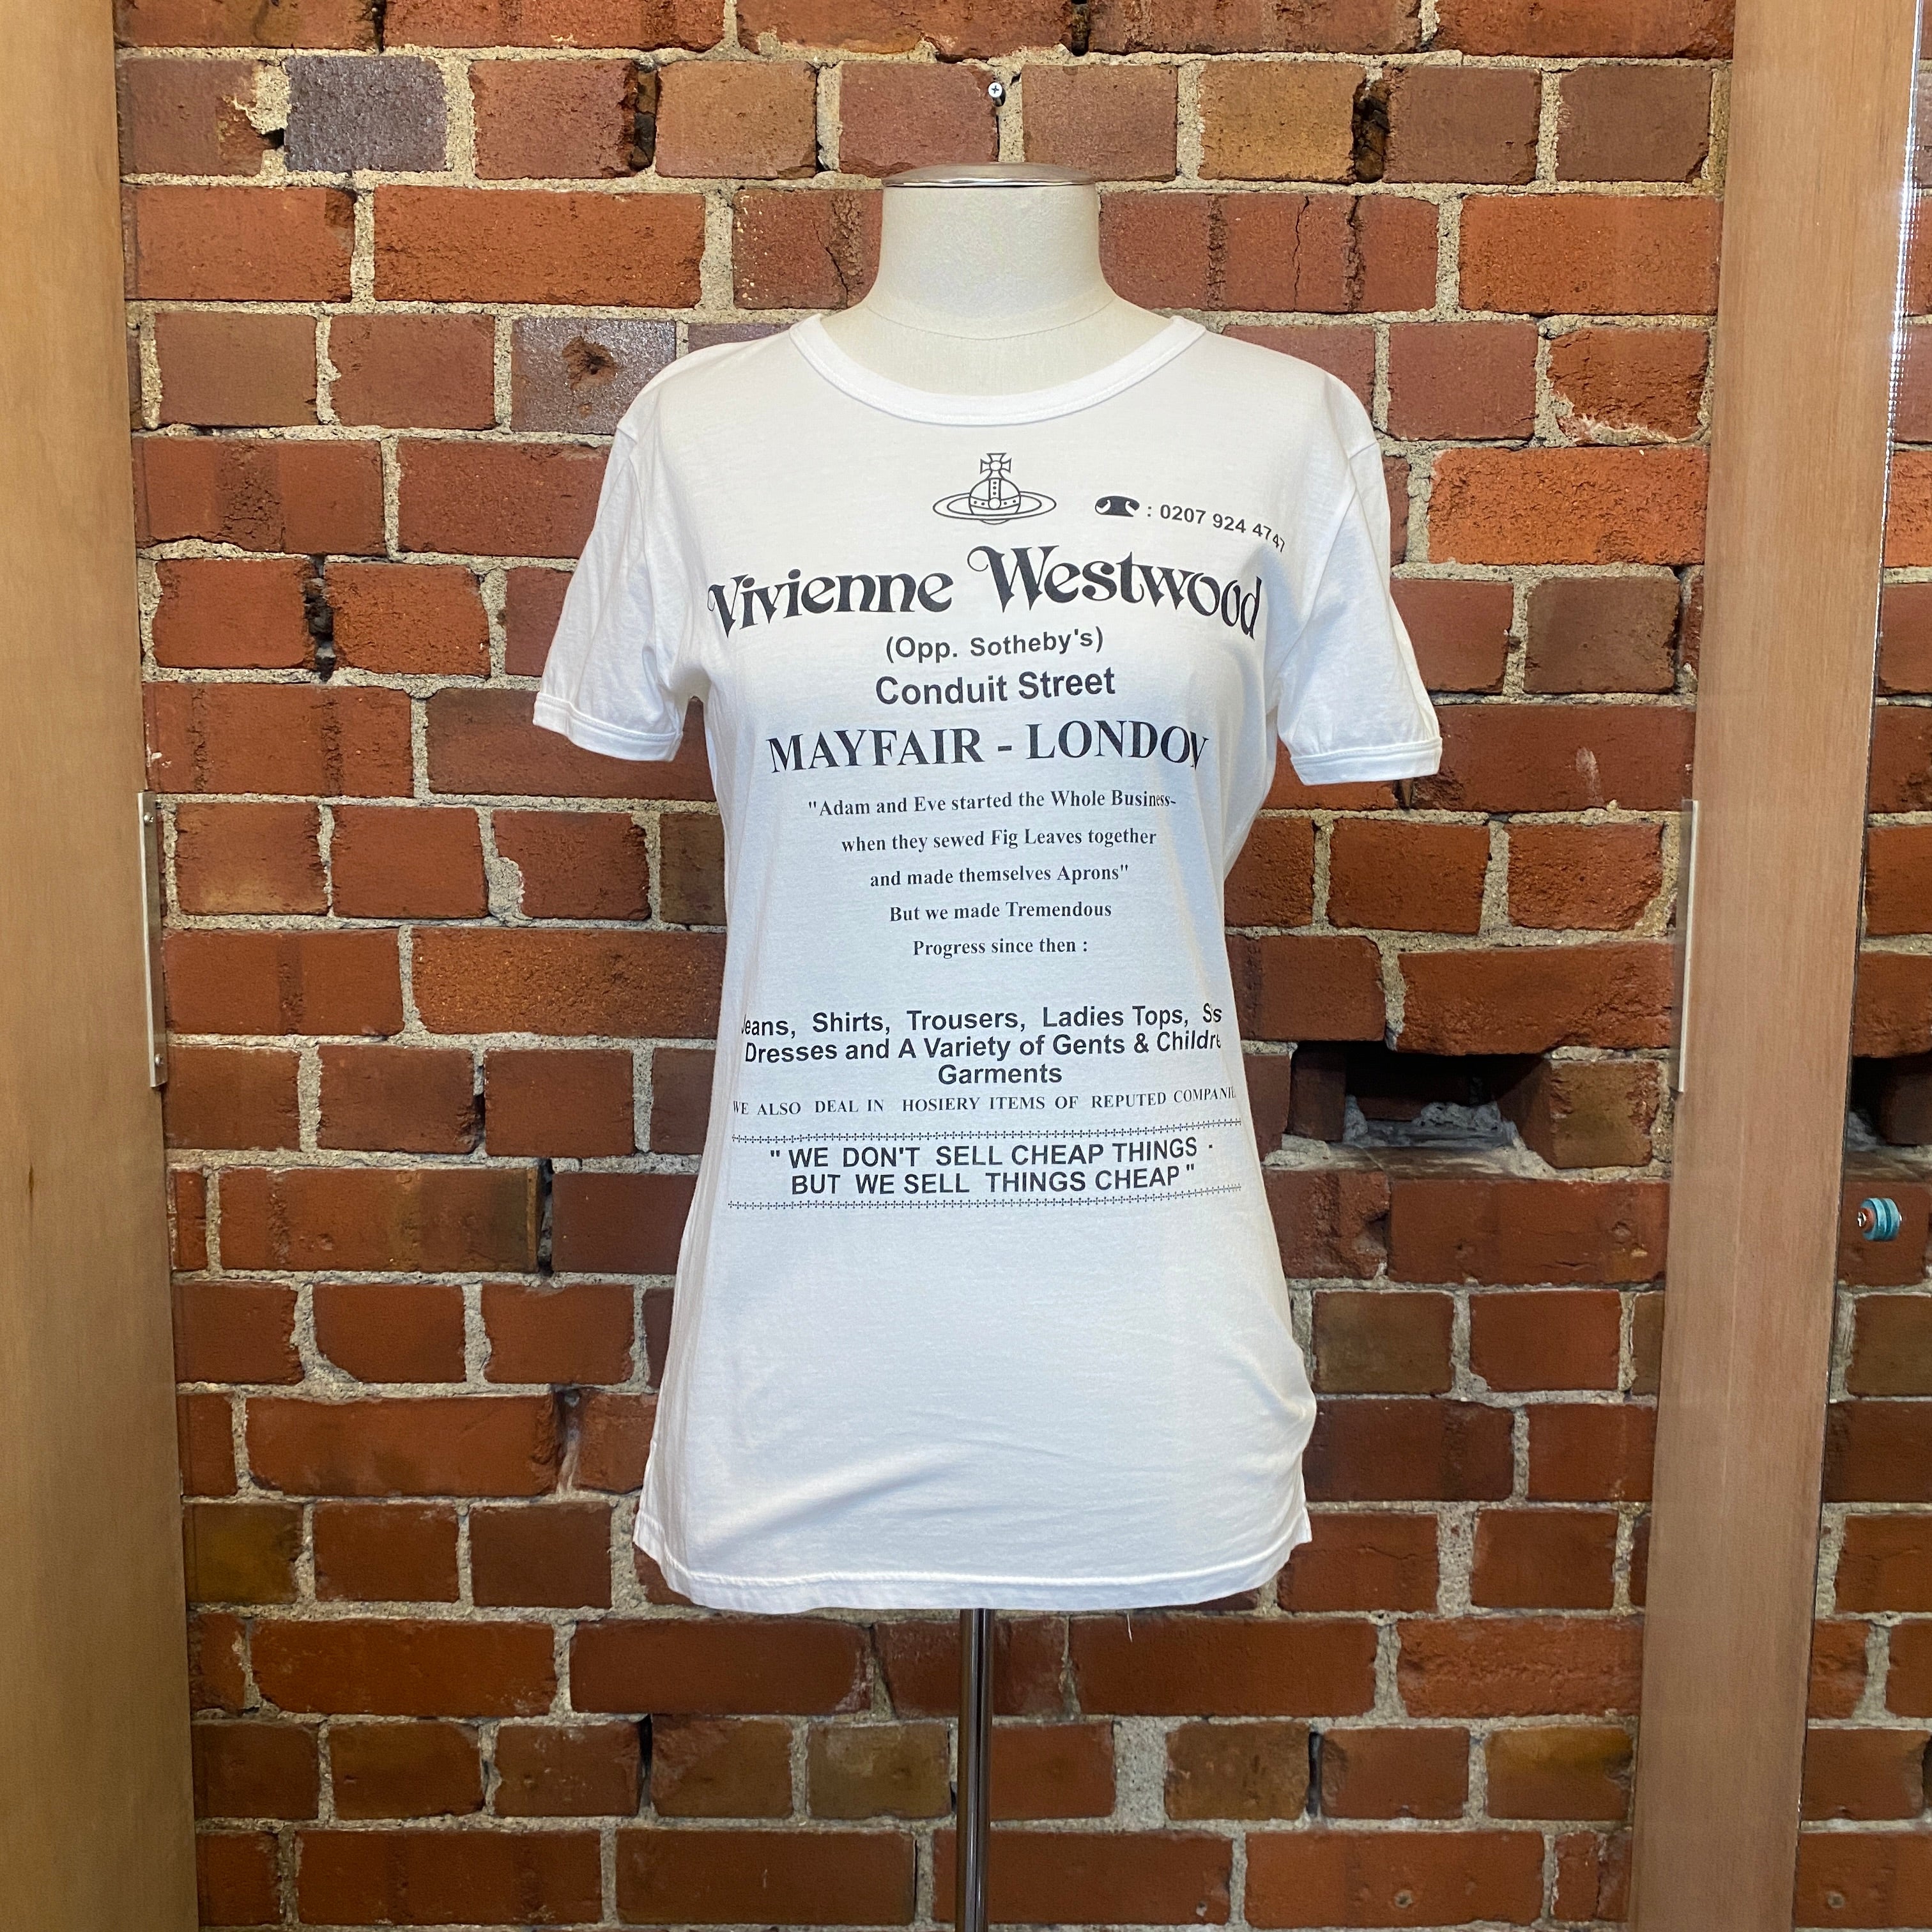 VIVIENNE WESTWOOD "we don't sell cheap things" tee